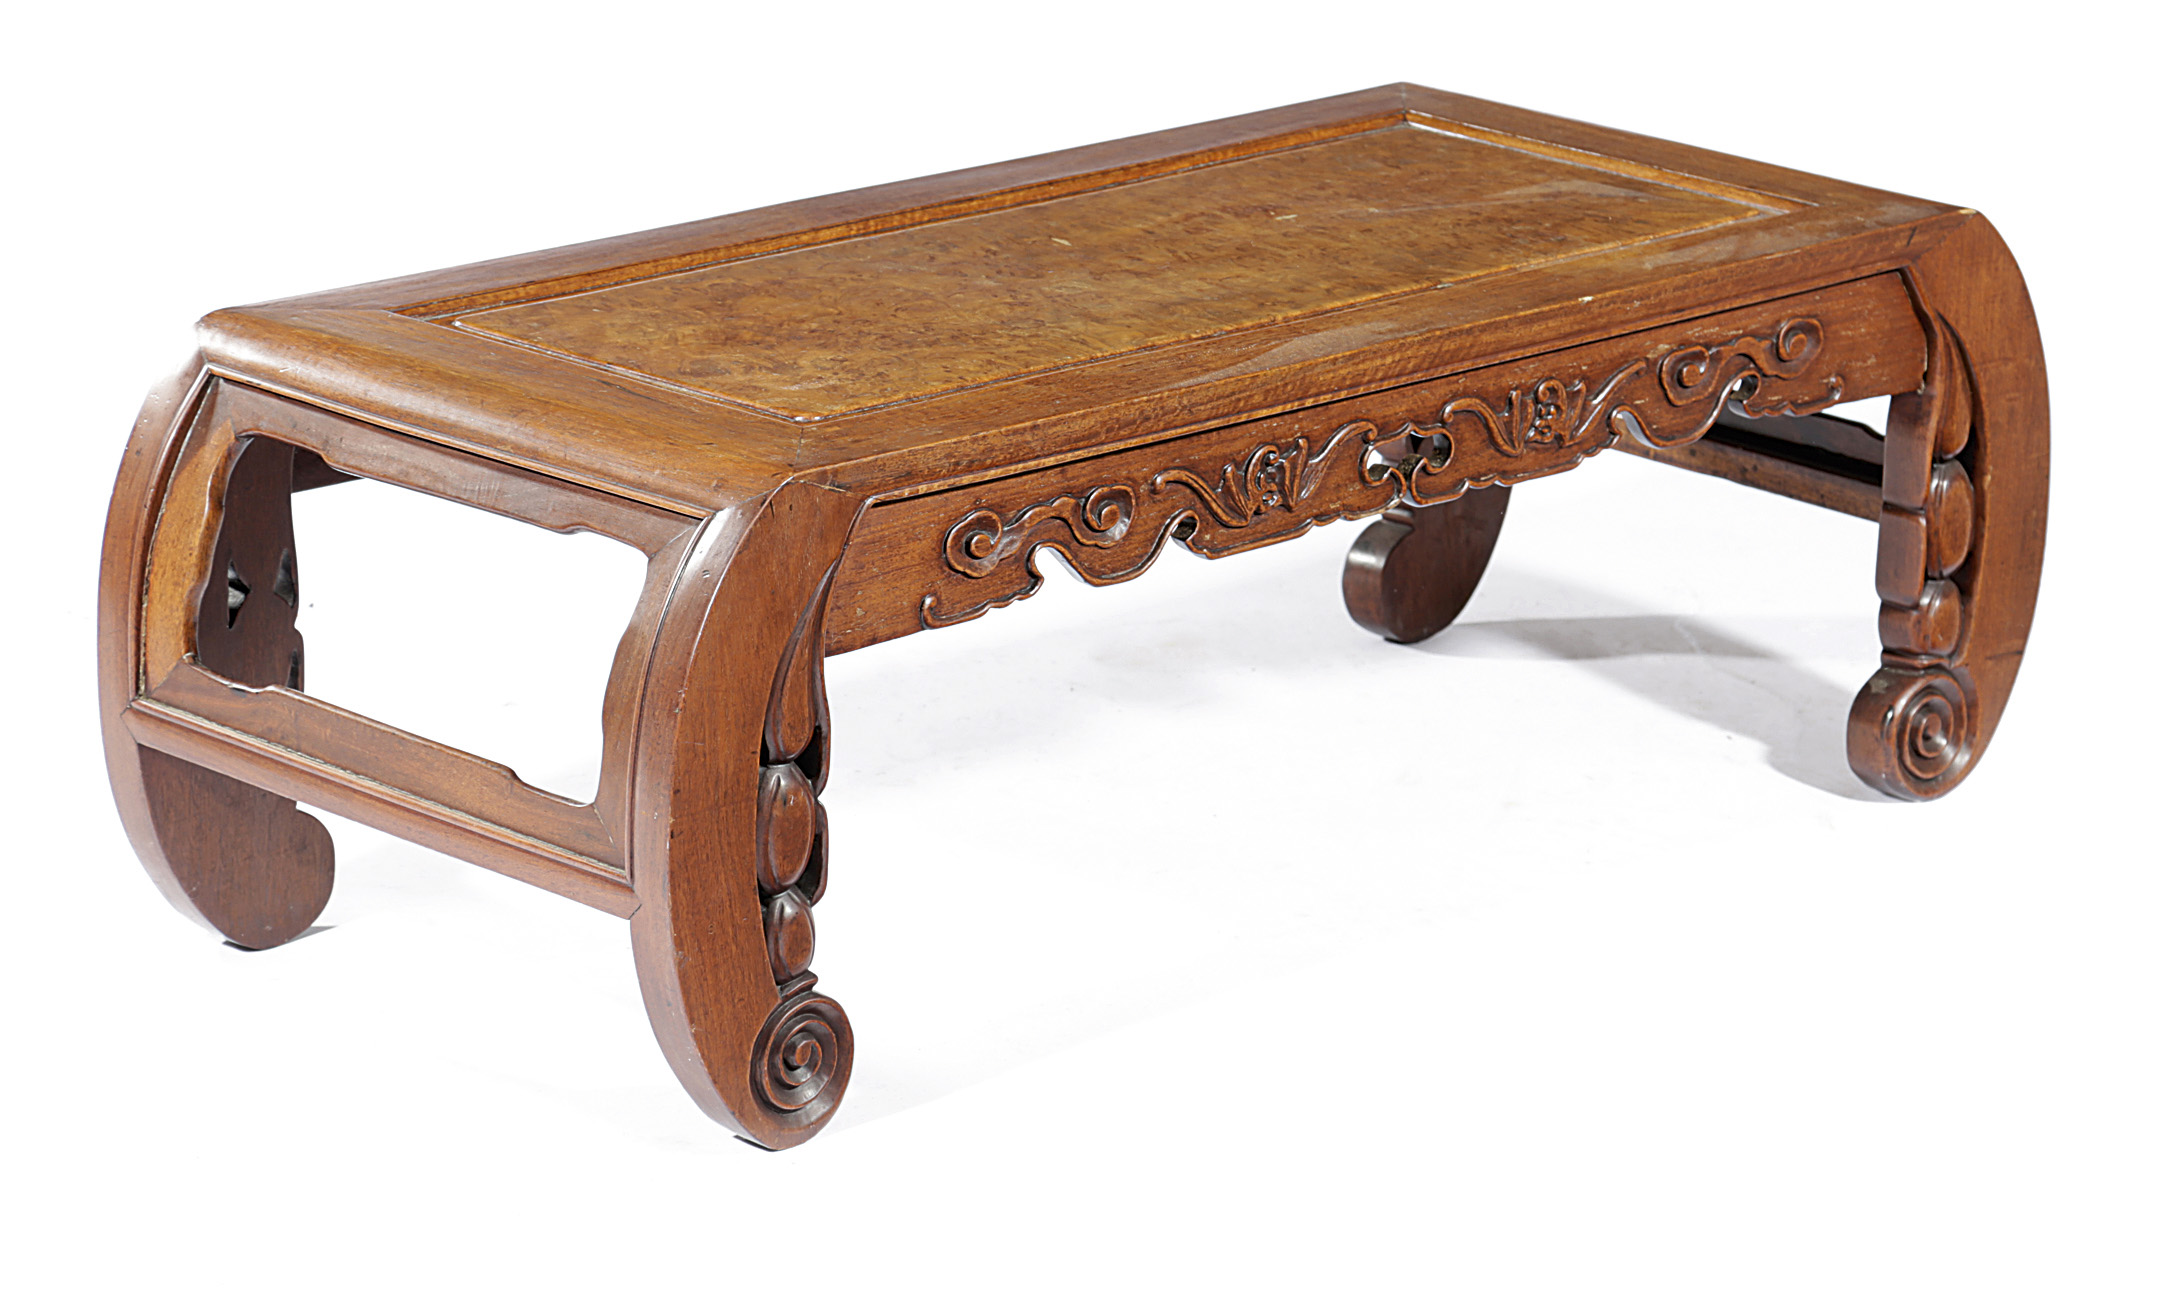 A CHINESE PADOUK KANG TABLE LATE 19TH CENTURY the top with a burr panel, above a frieze carved